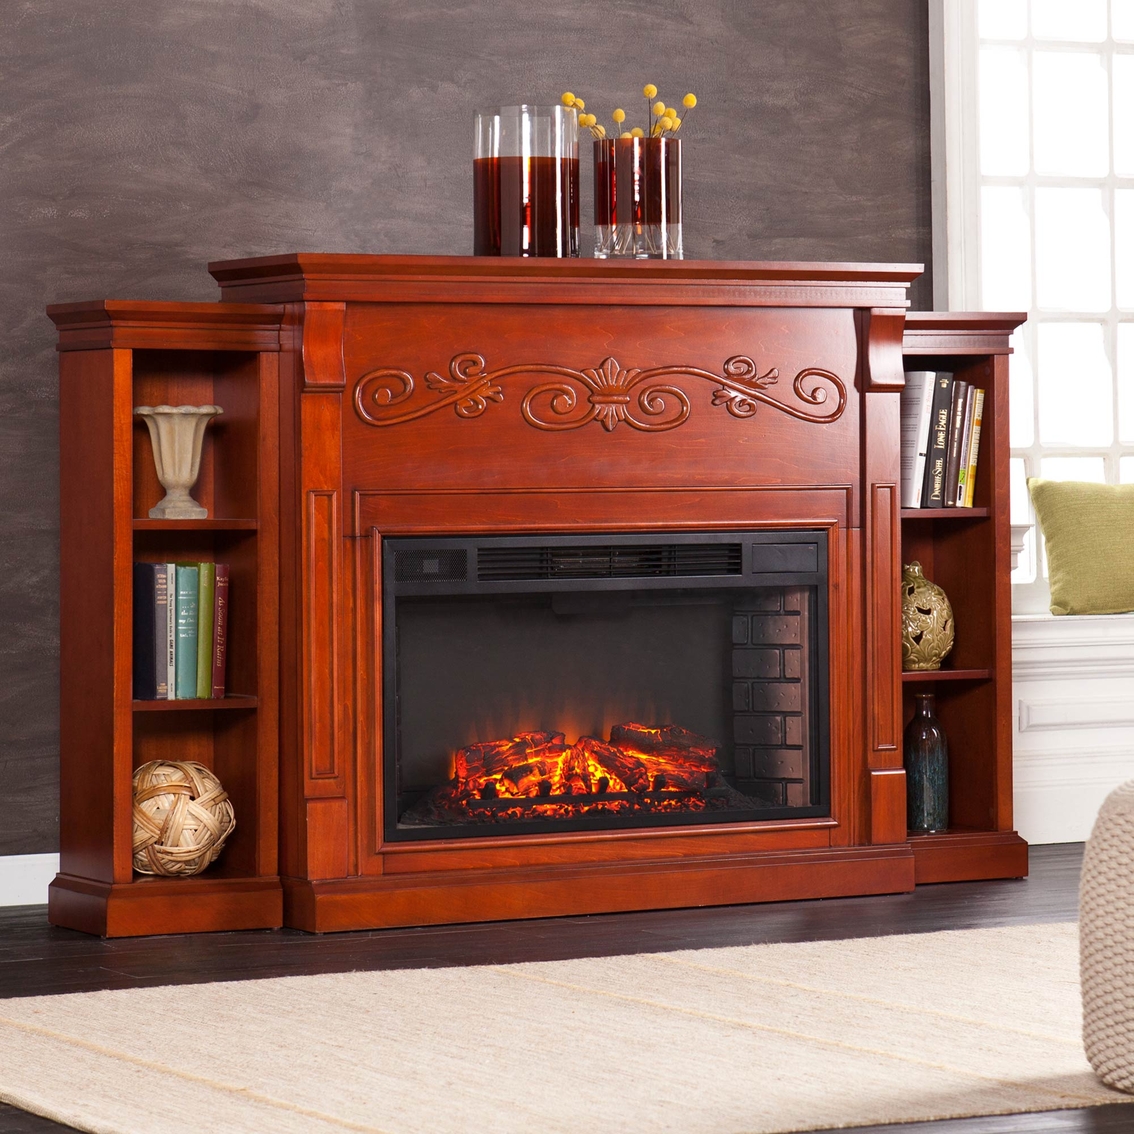 Bookcase Electric Fireplace Another Home Image Ideas